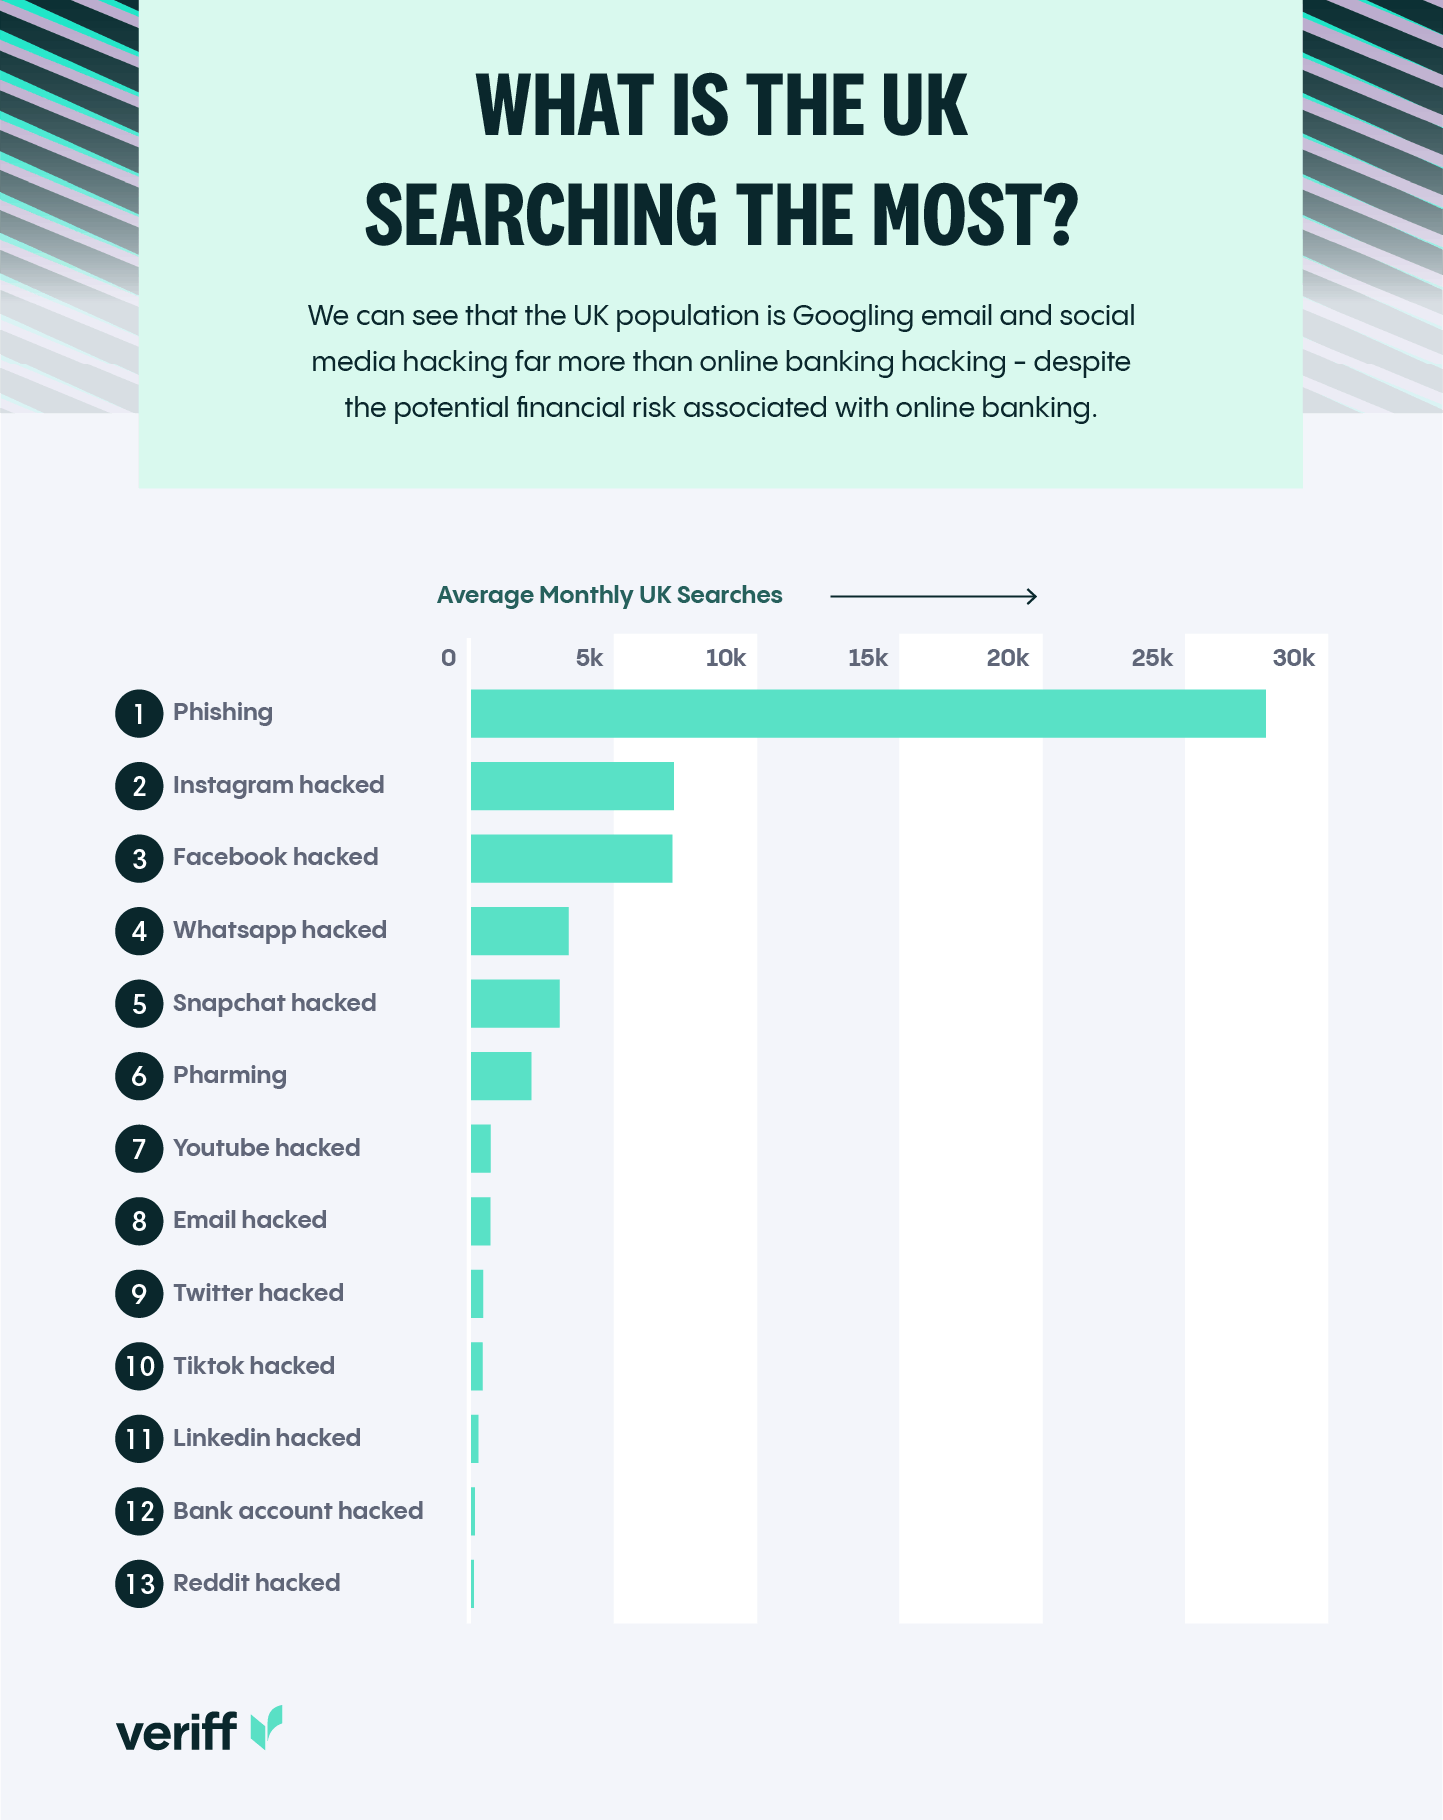 A bar chart showing which identity theft terms the UK are searching for the most